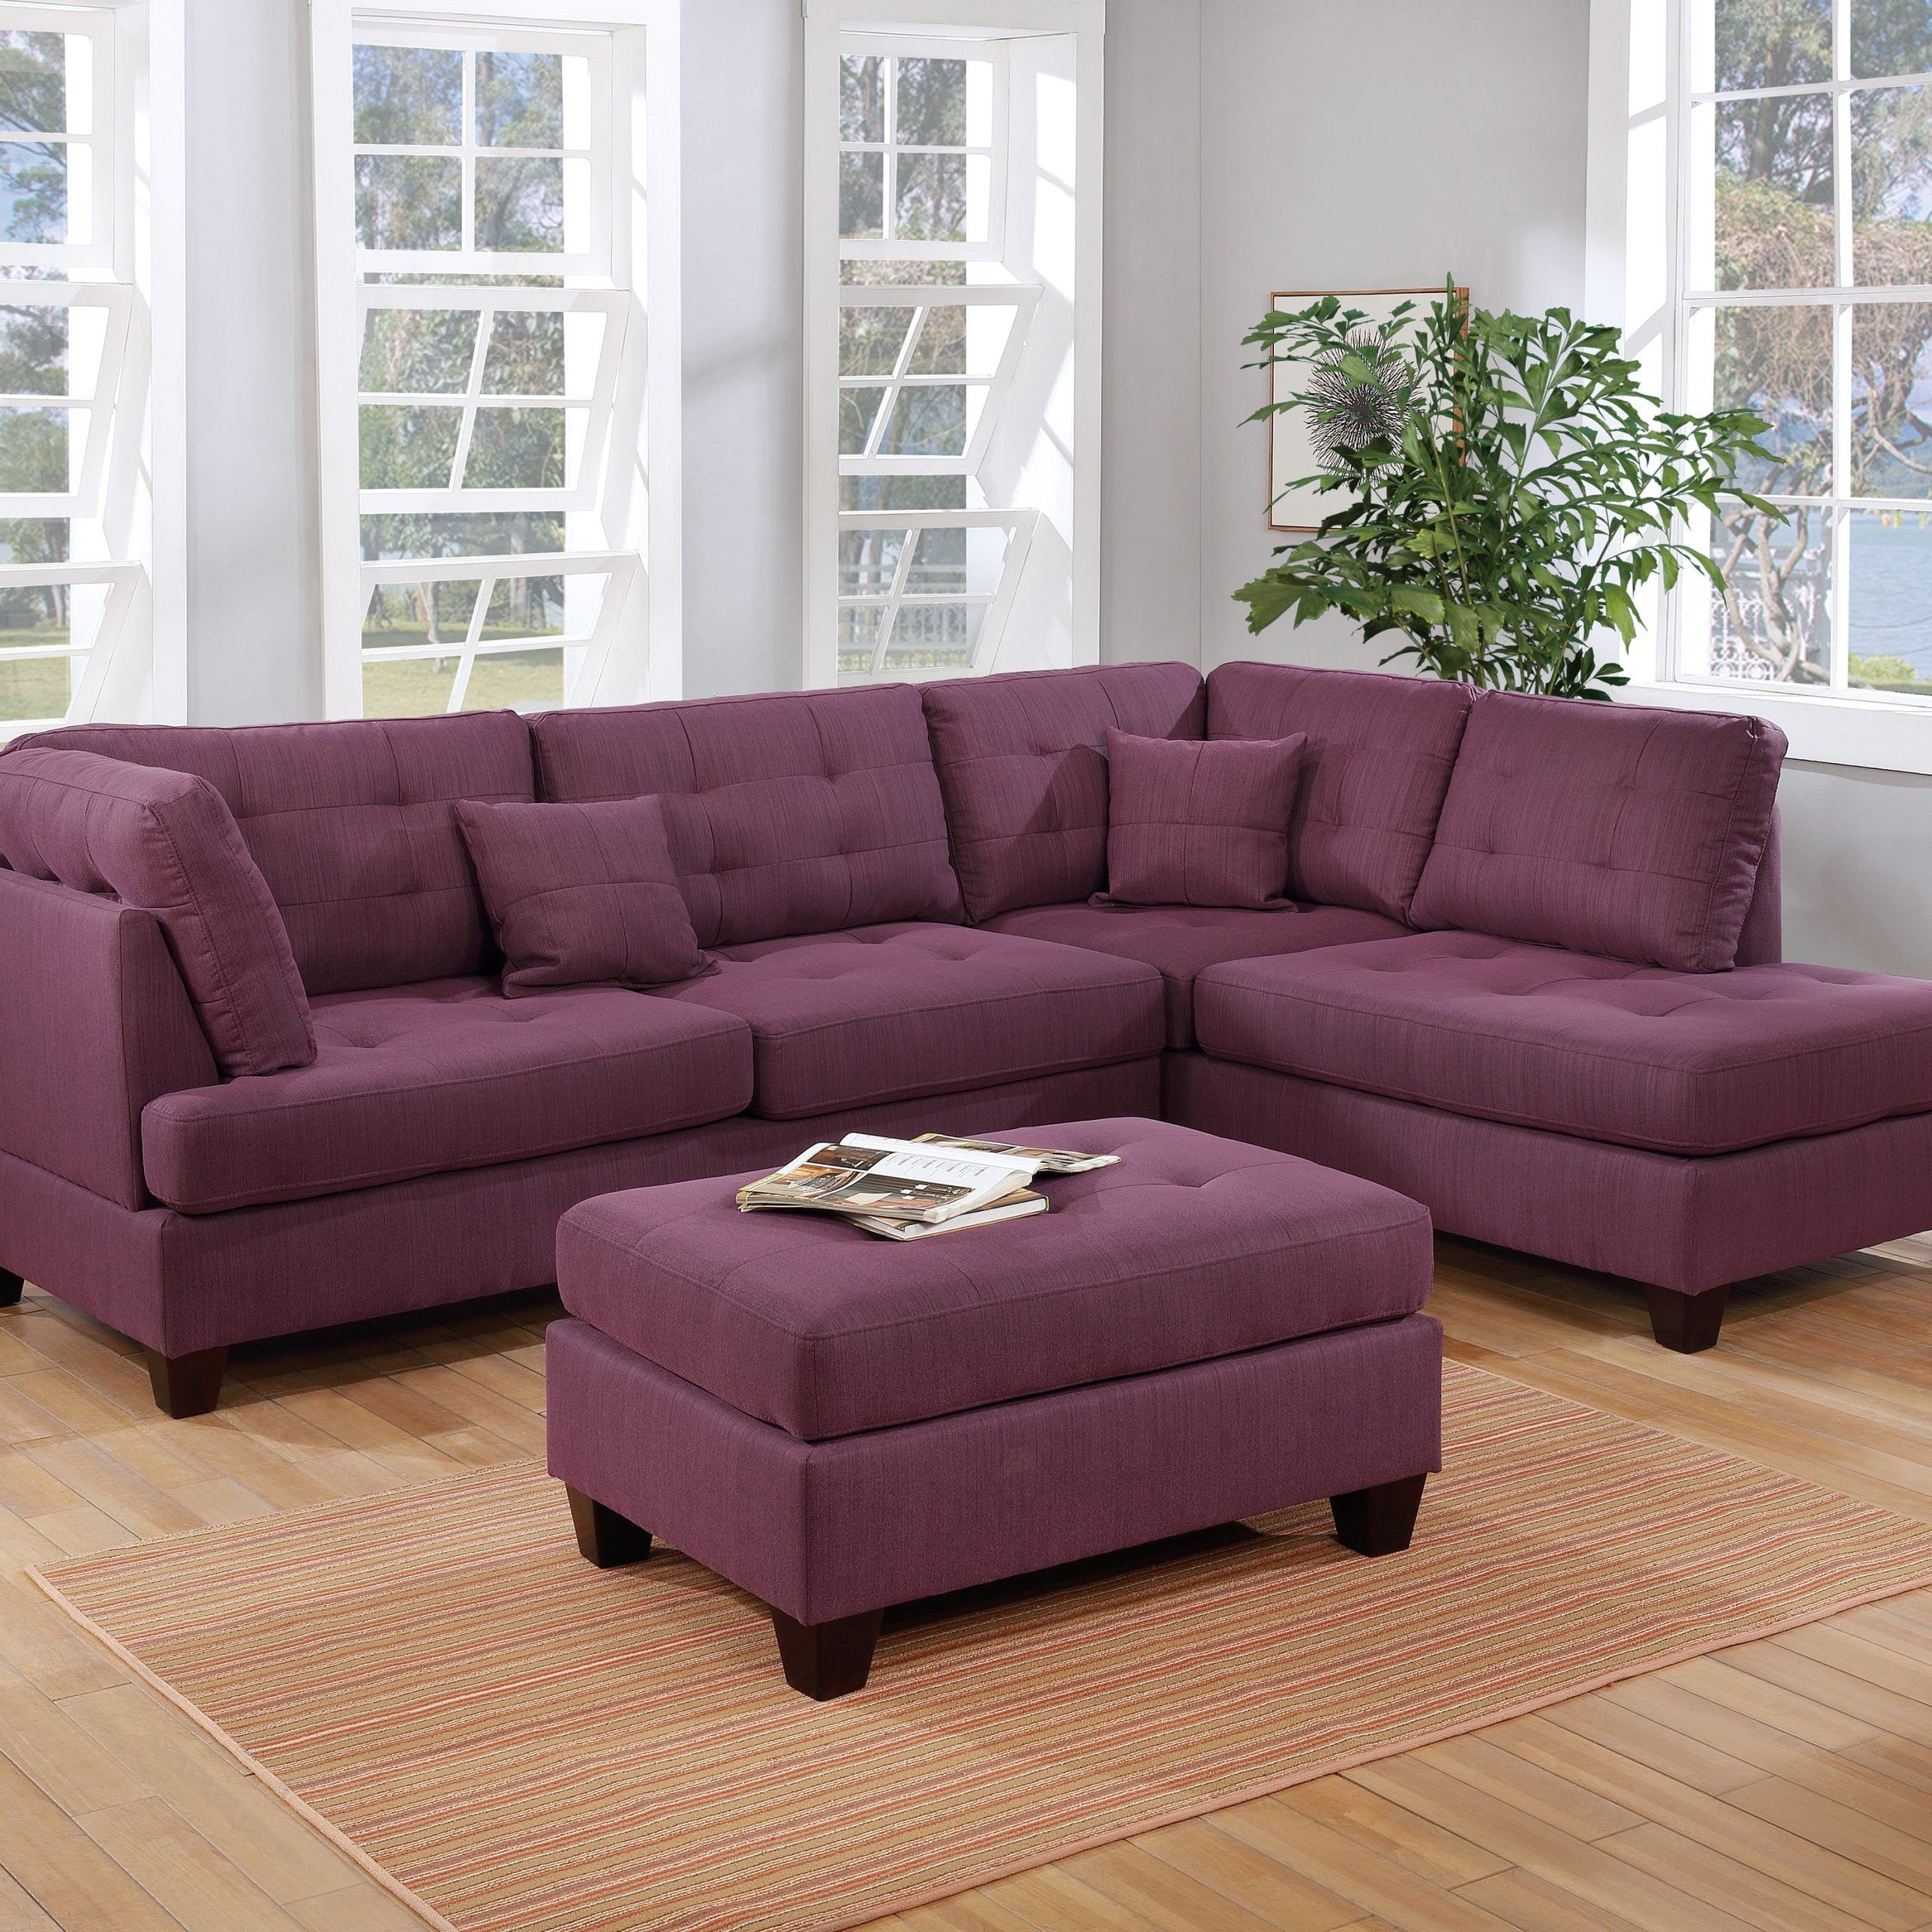 Sofas With Ottomans For Trendy Living Room Modern Contemporary Purple Polyfiber Sectional Sofa Ottoman (View 14 of 15)